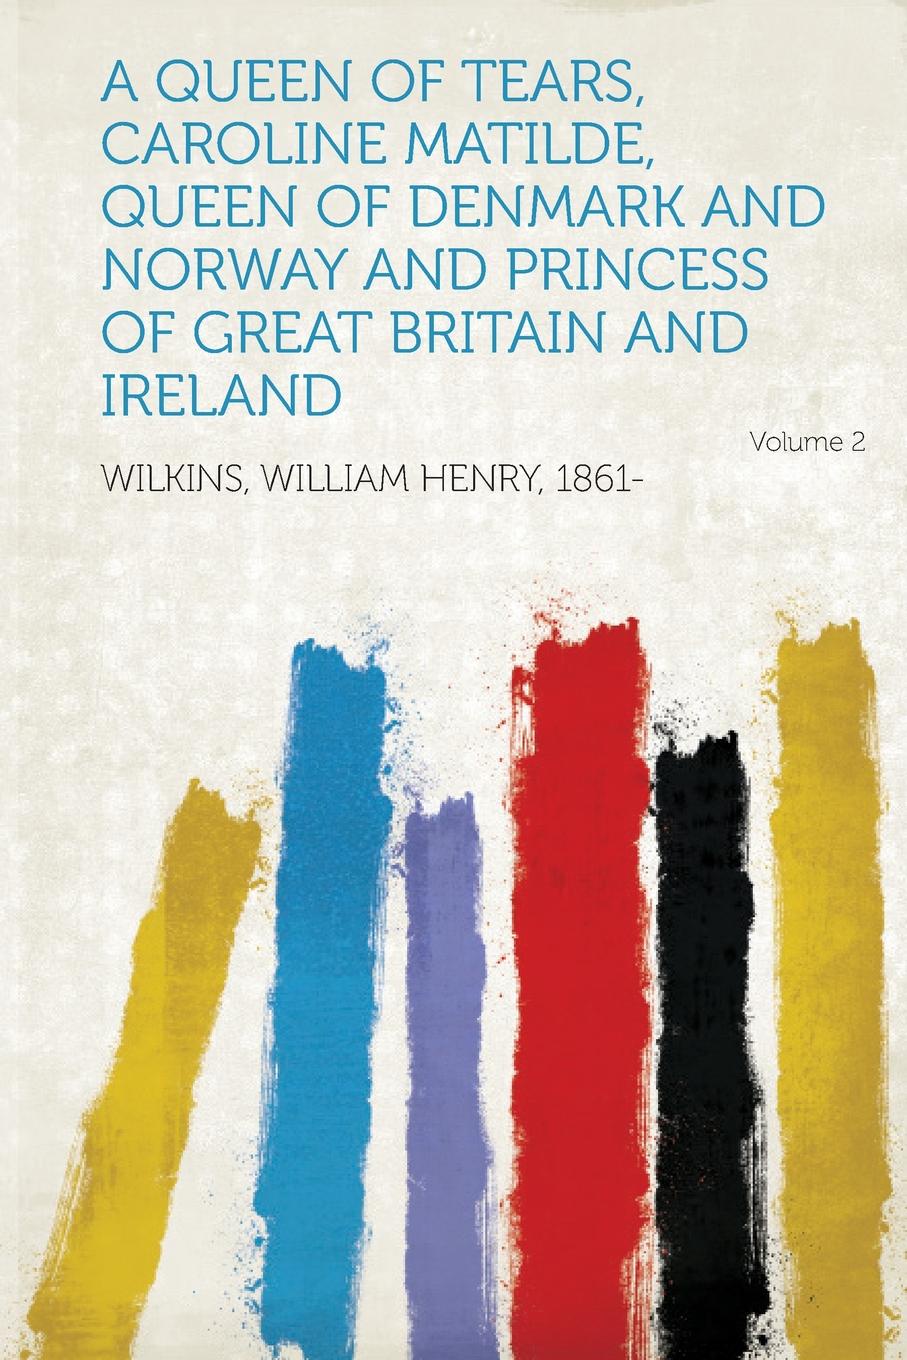 A Queen of Tears, Caroline Matilde, Queen of Denmark and Norway and Princess of Great Britain and Ireland Volume 2